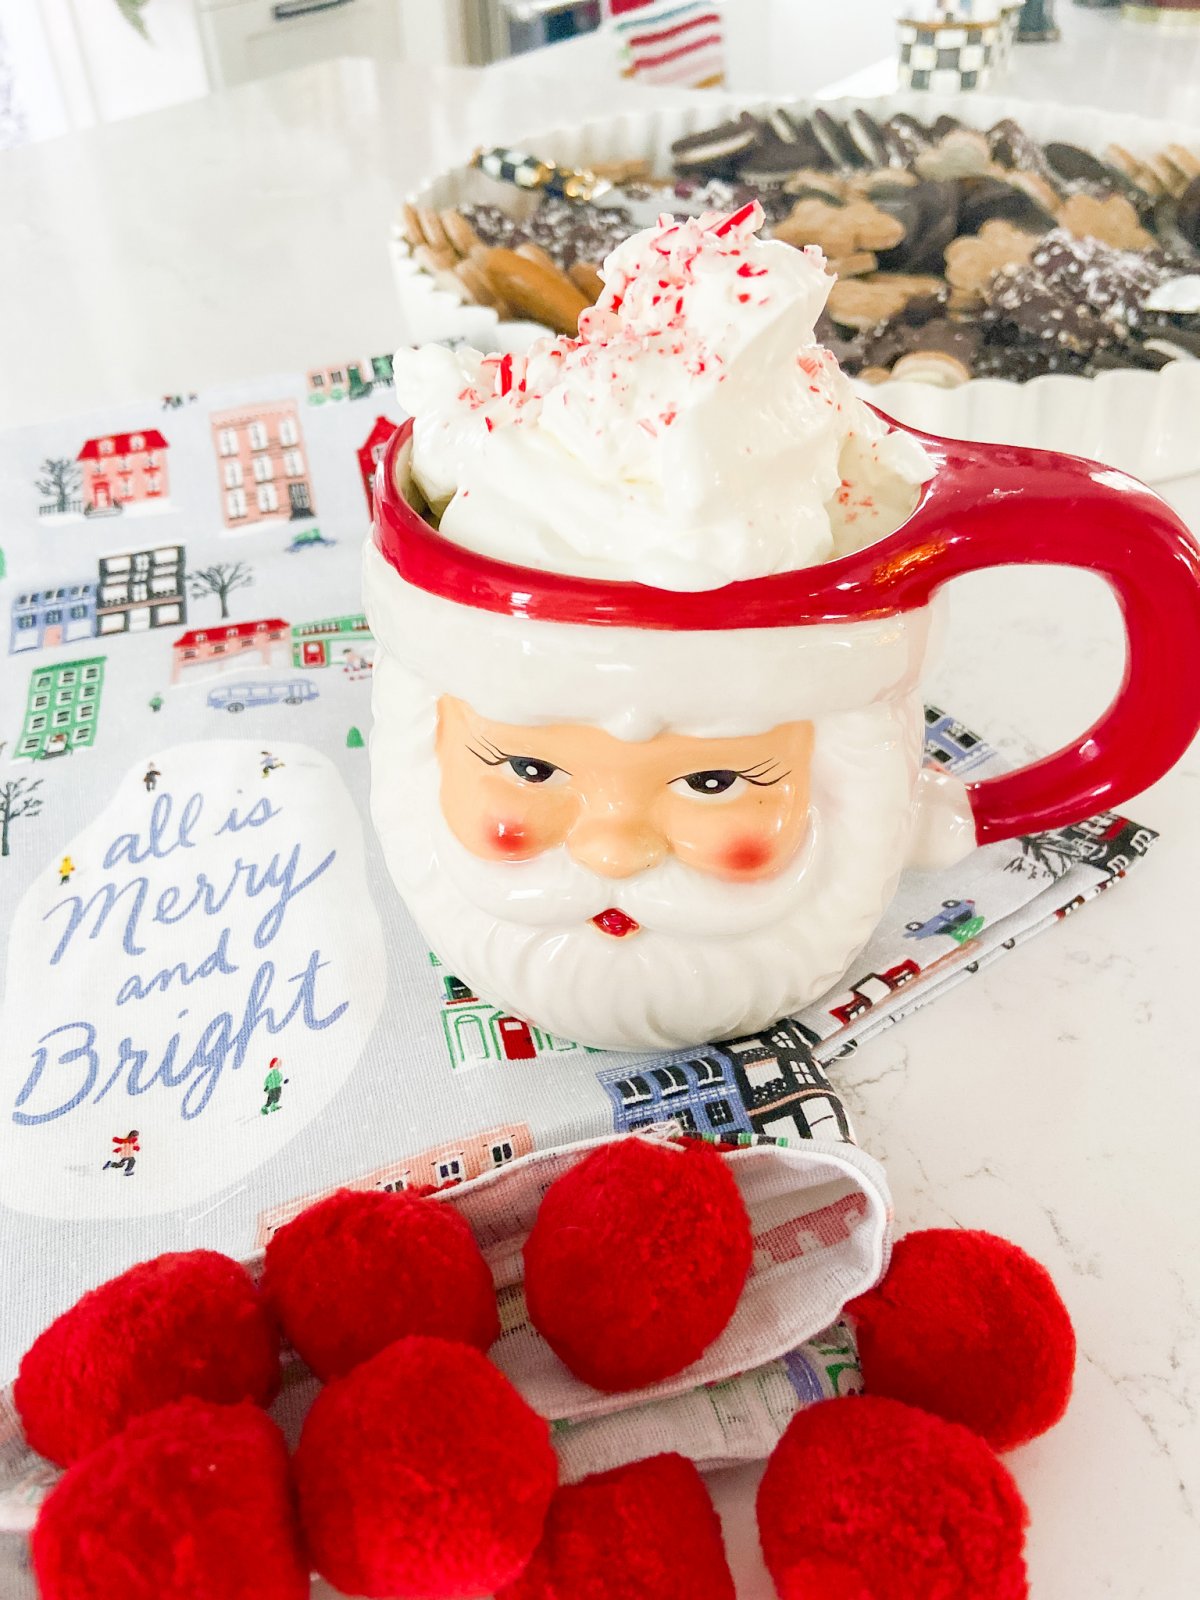 Keto Sugar Free Peppermint Hot Chocolate. Enjoy all of the winter peppermint and chocolate goodness without the sugar or carbs! 